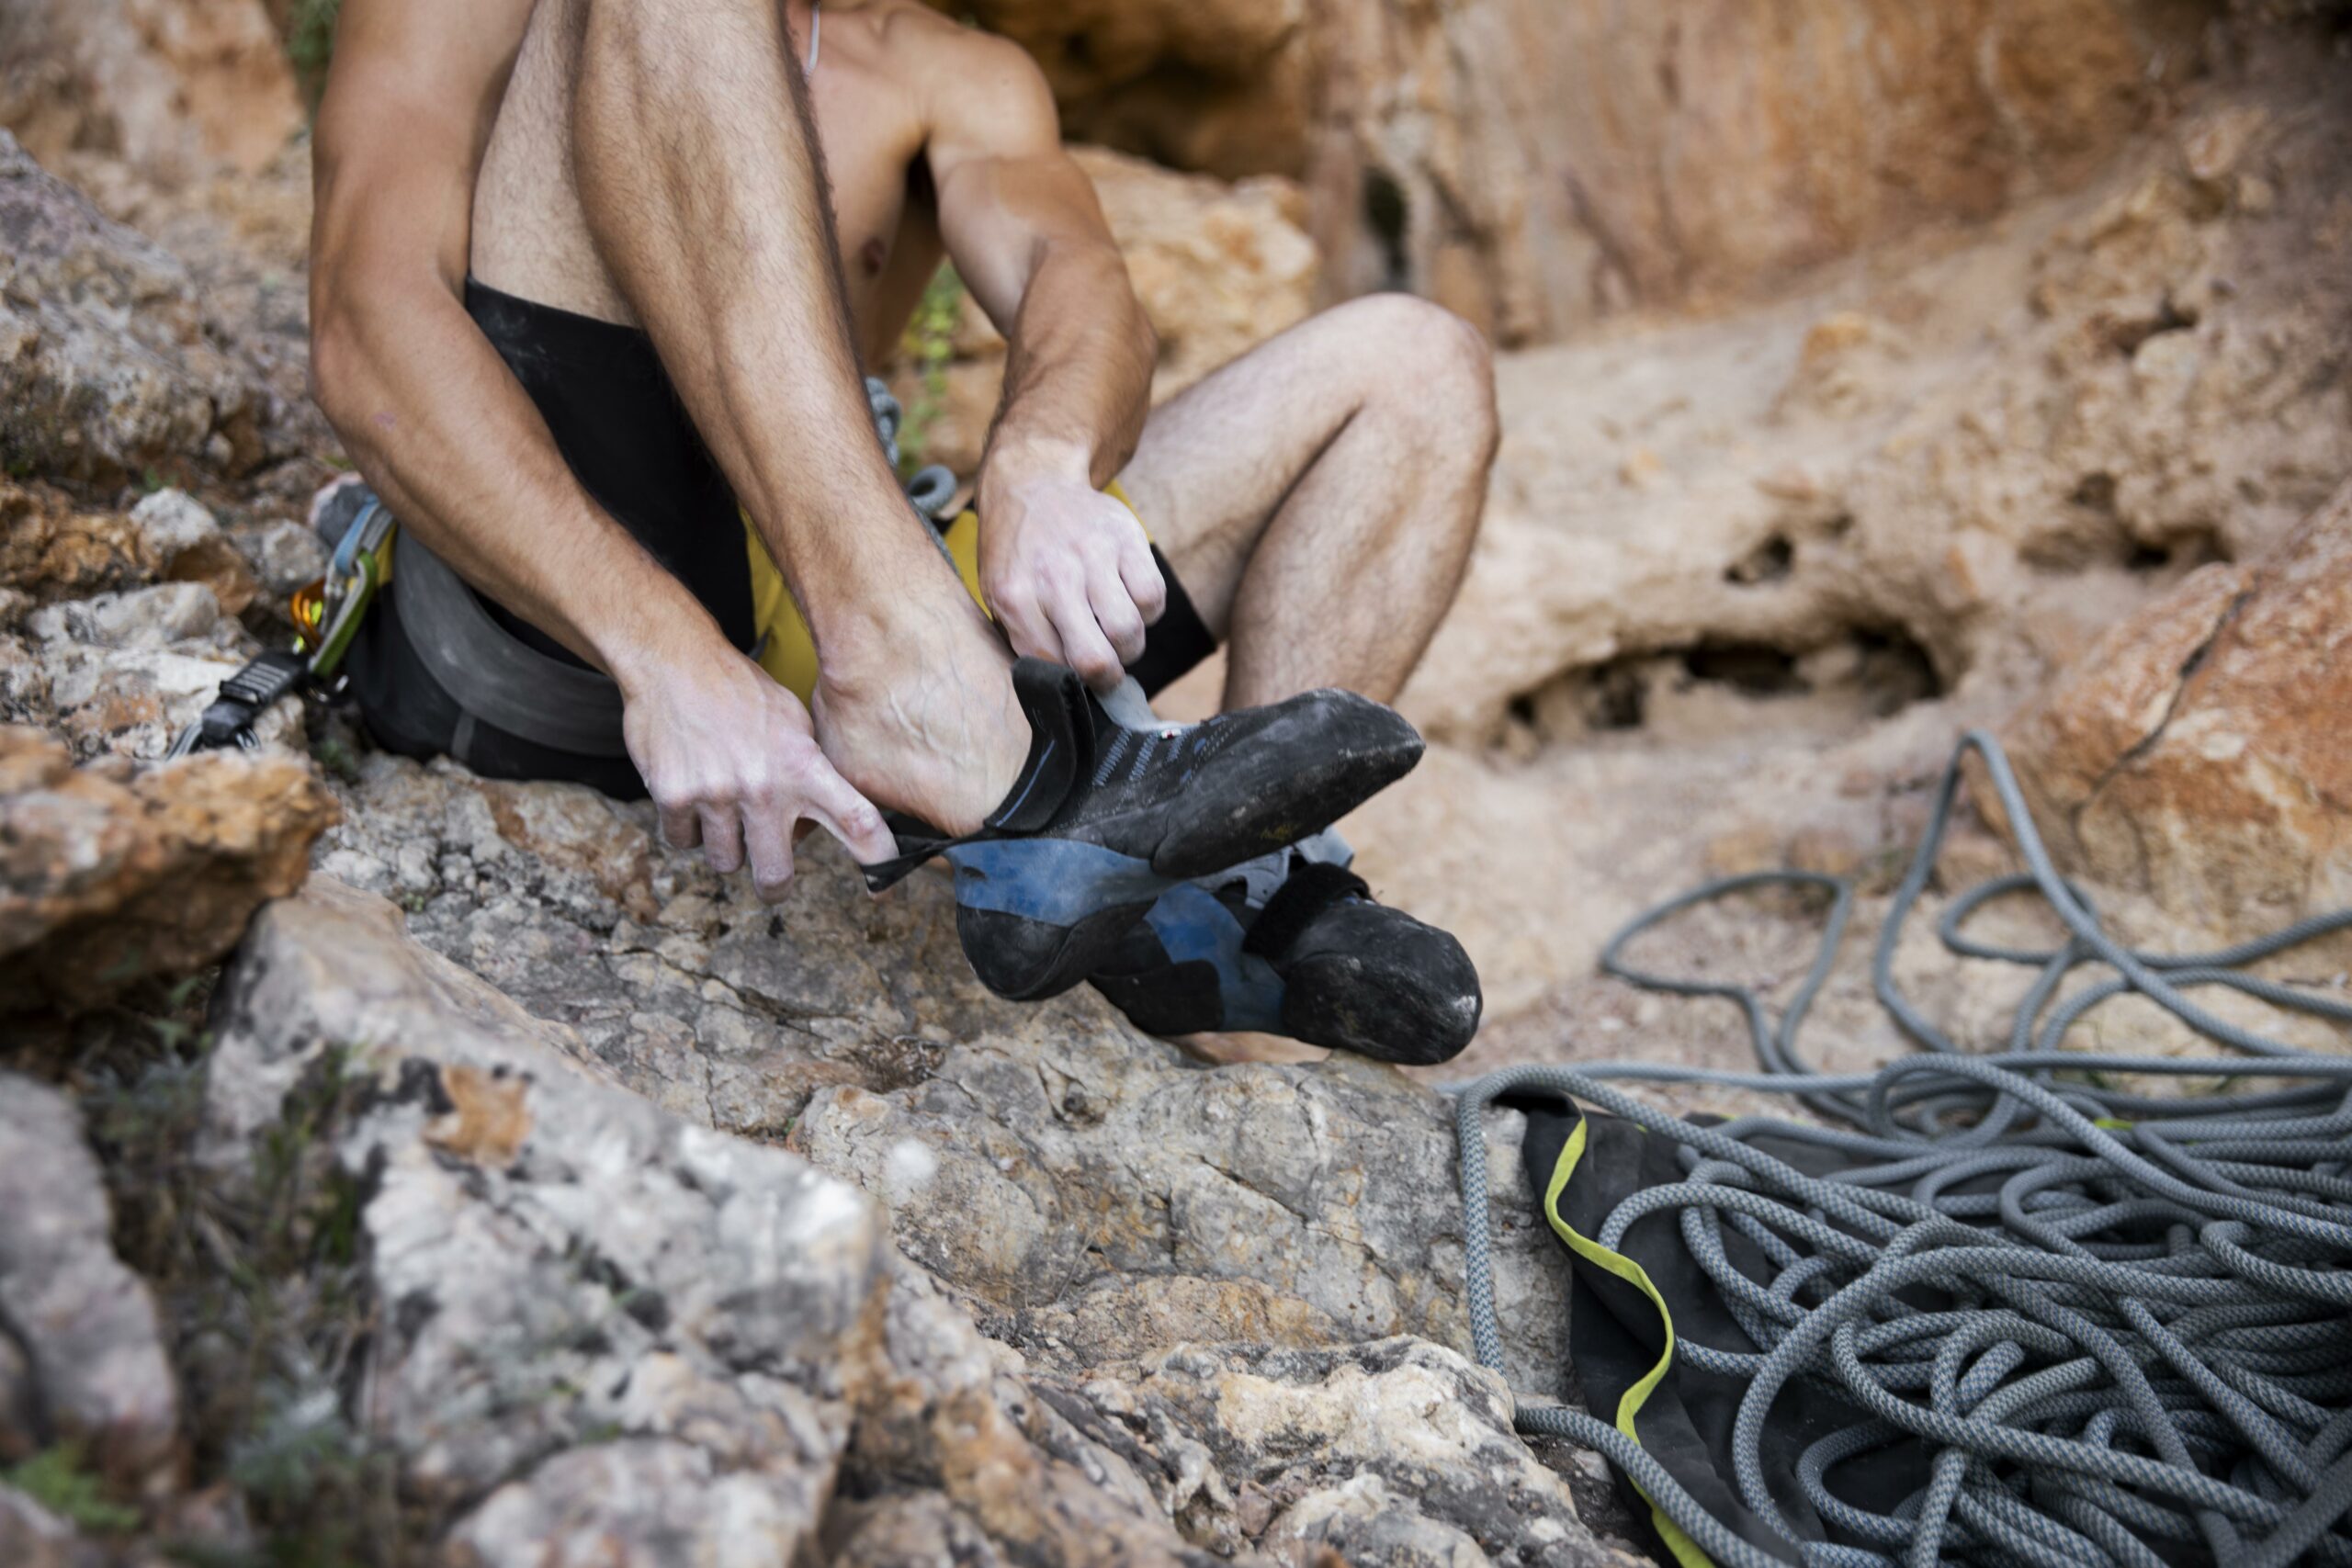 A close-up of a person's hands tying a secure knot on a rope as they prepare to start their rappelling descent.